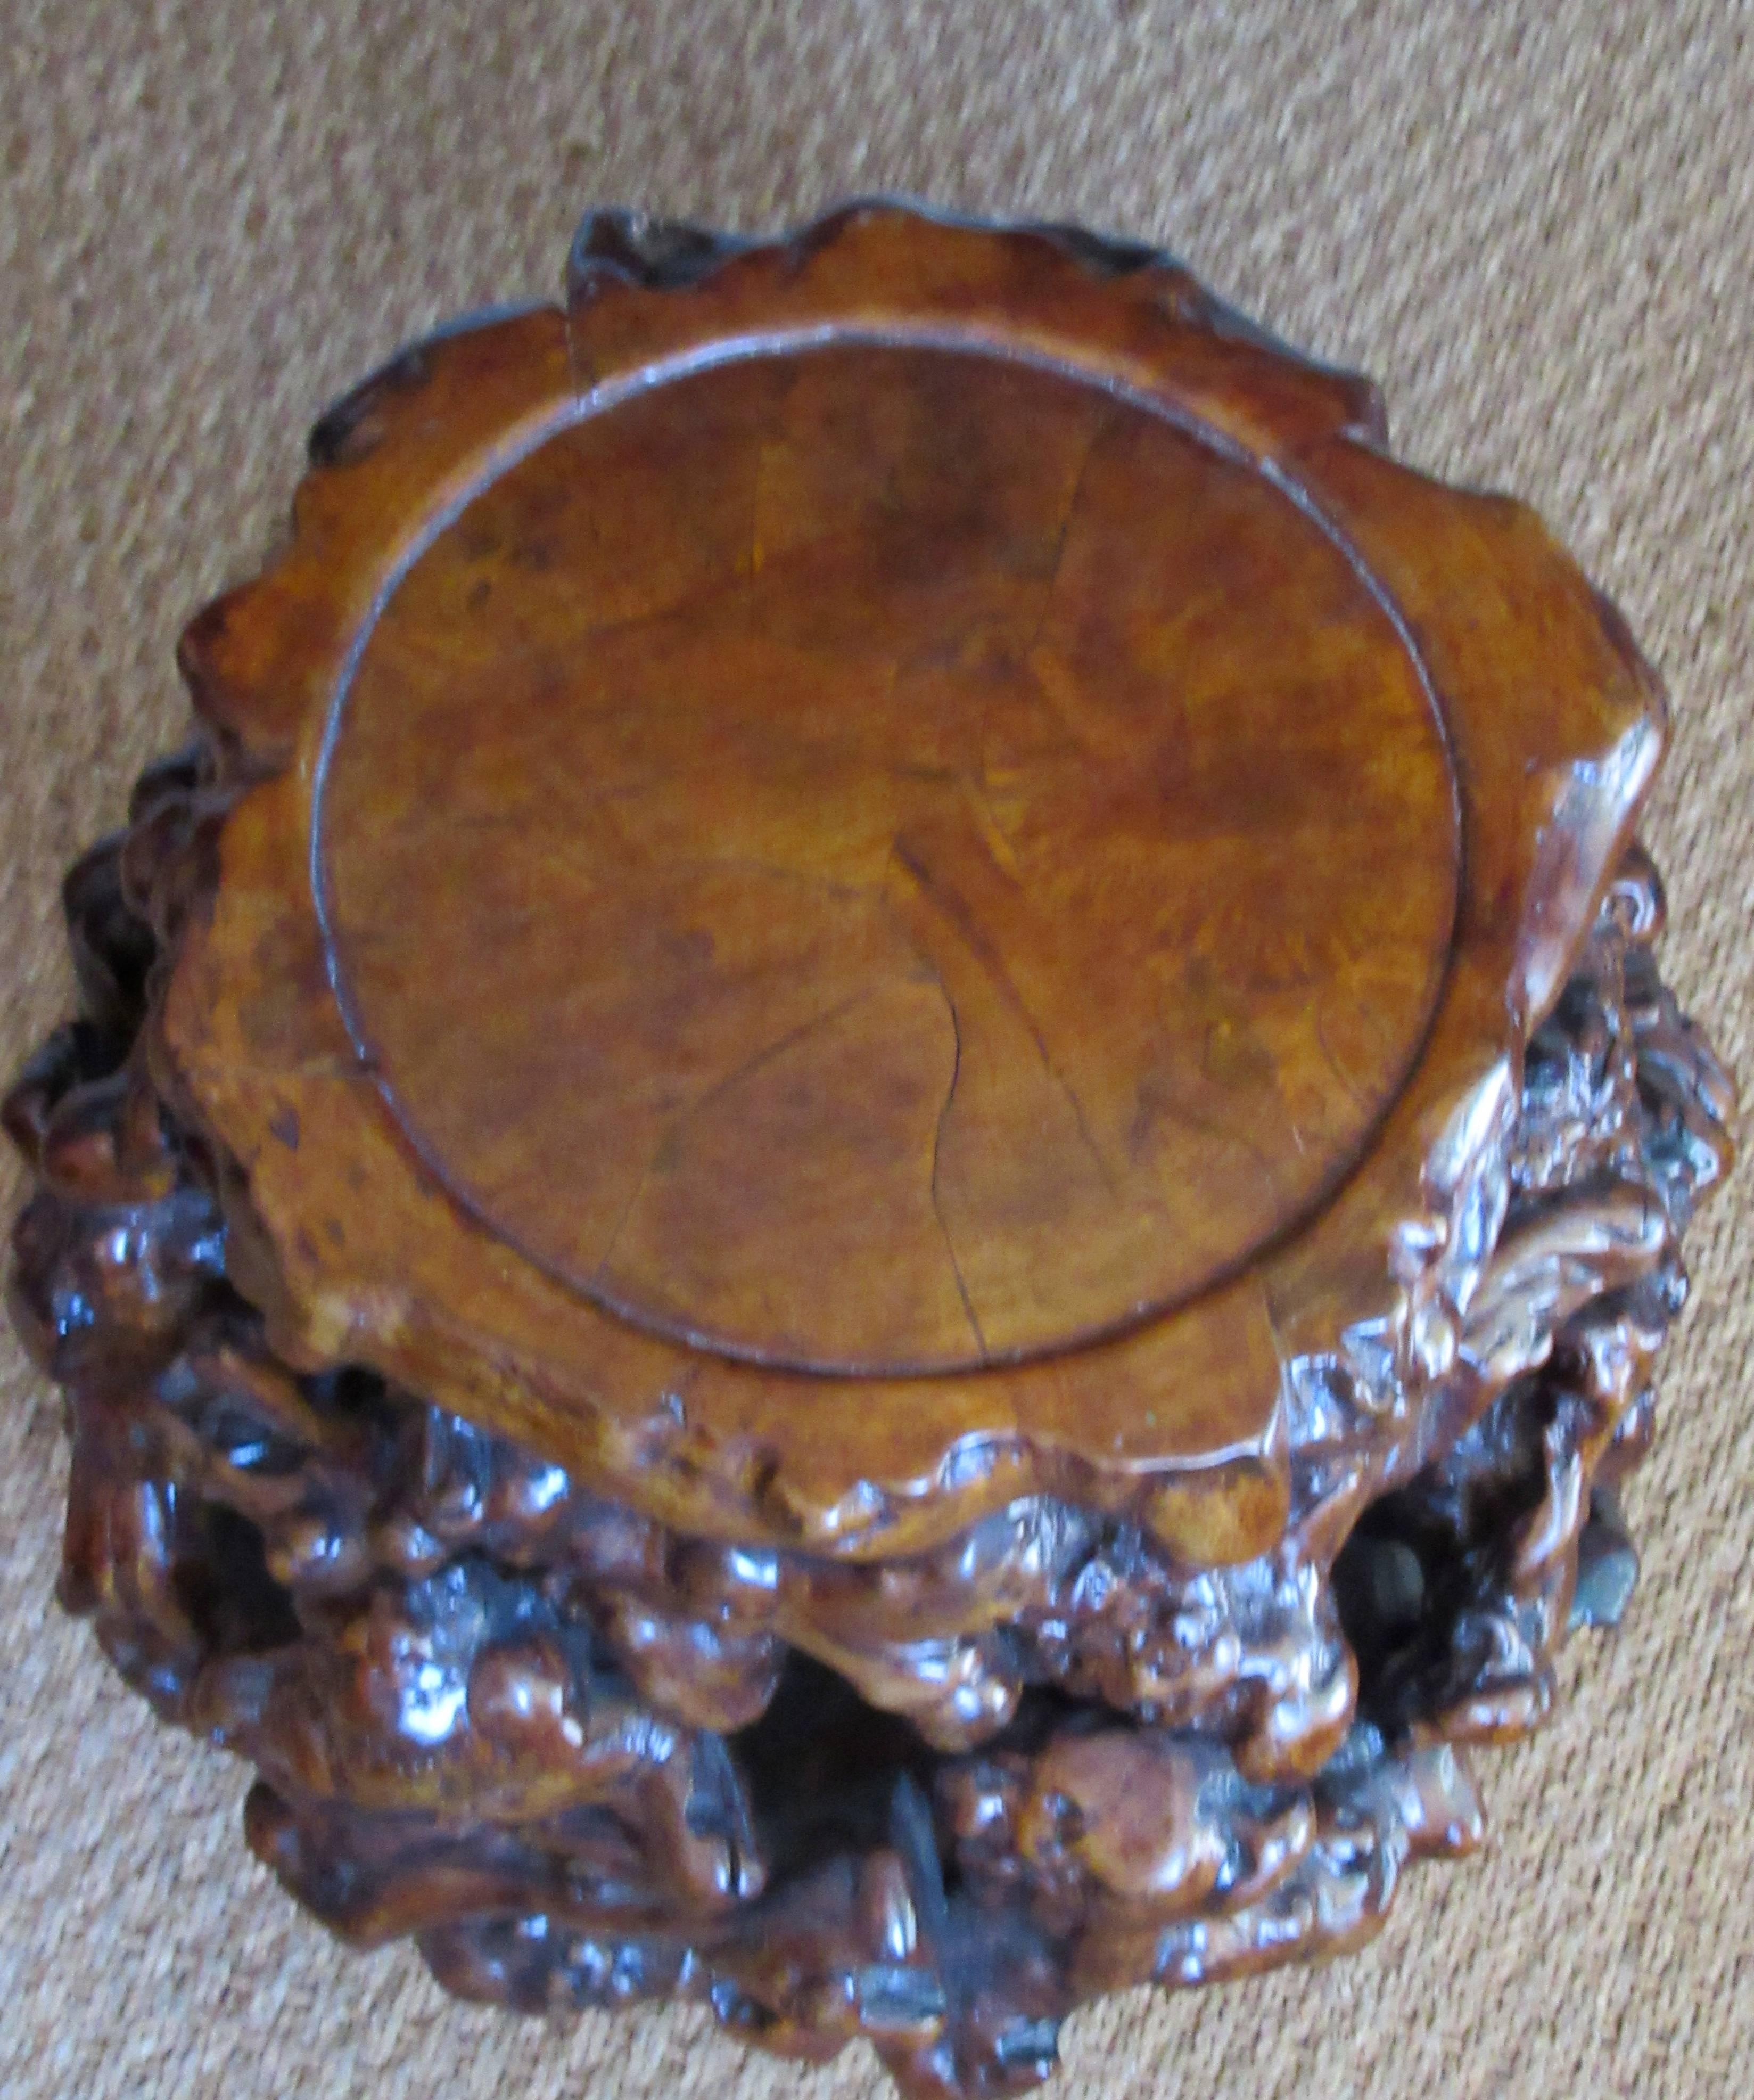 Classic vine root constructed drum shaped stool or table with burl wood top. Compelling depth of color and organic design. The piece measure is 16